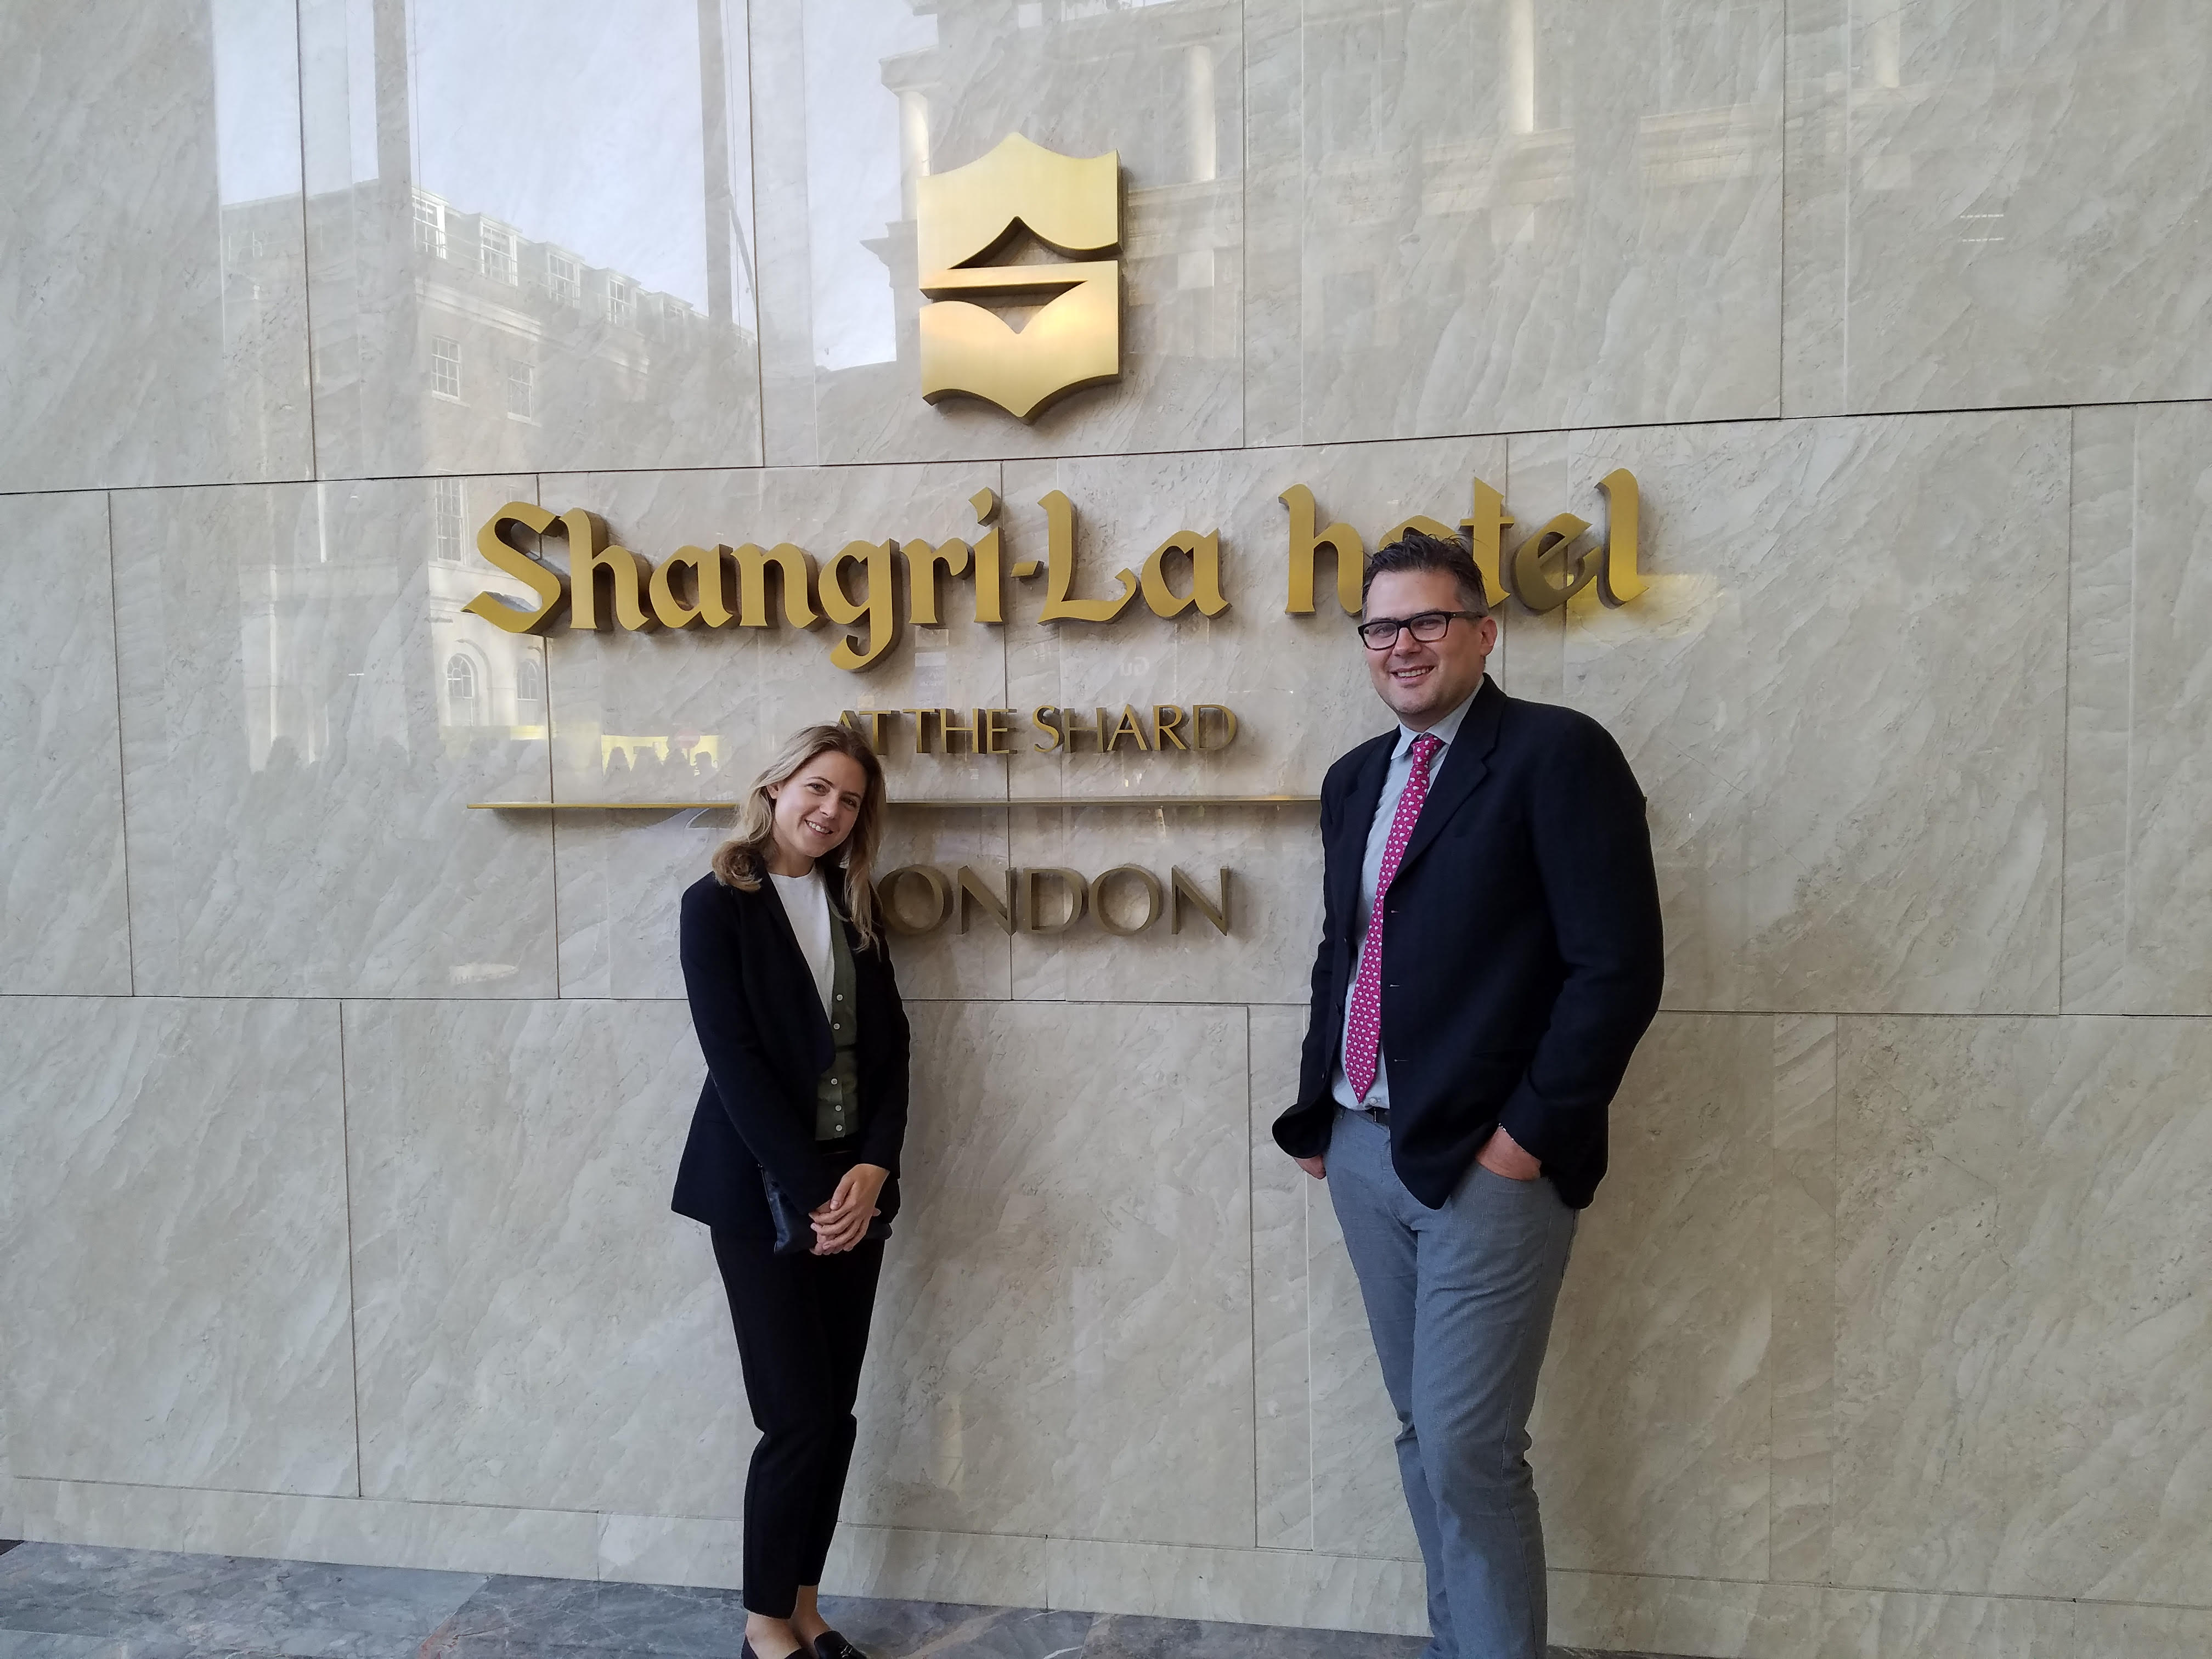 Andrey Zakharenko, Russian Connections at the Shangri-La Hotel London